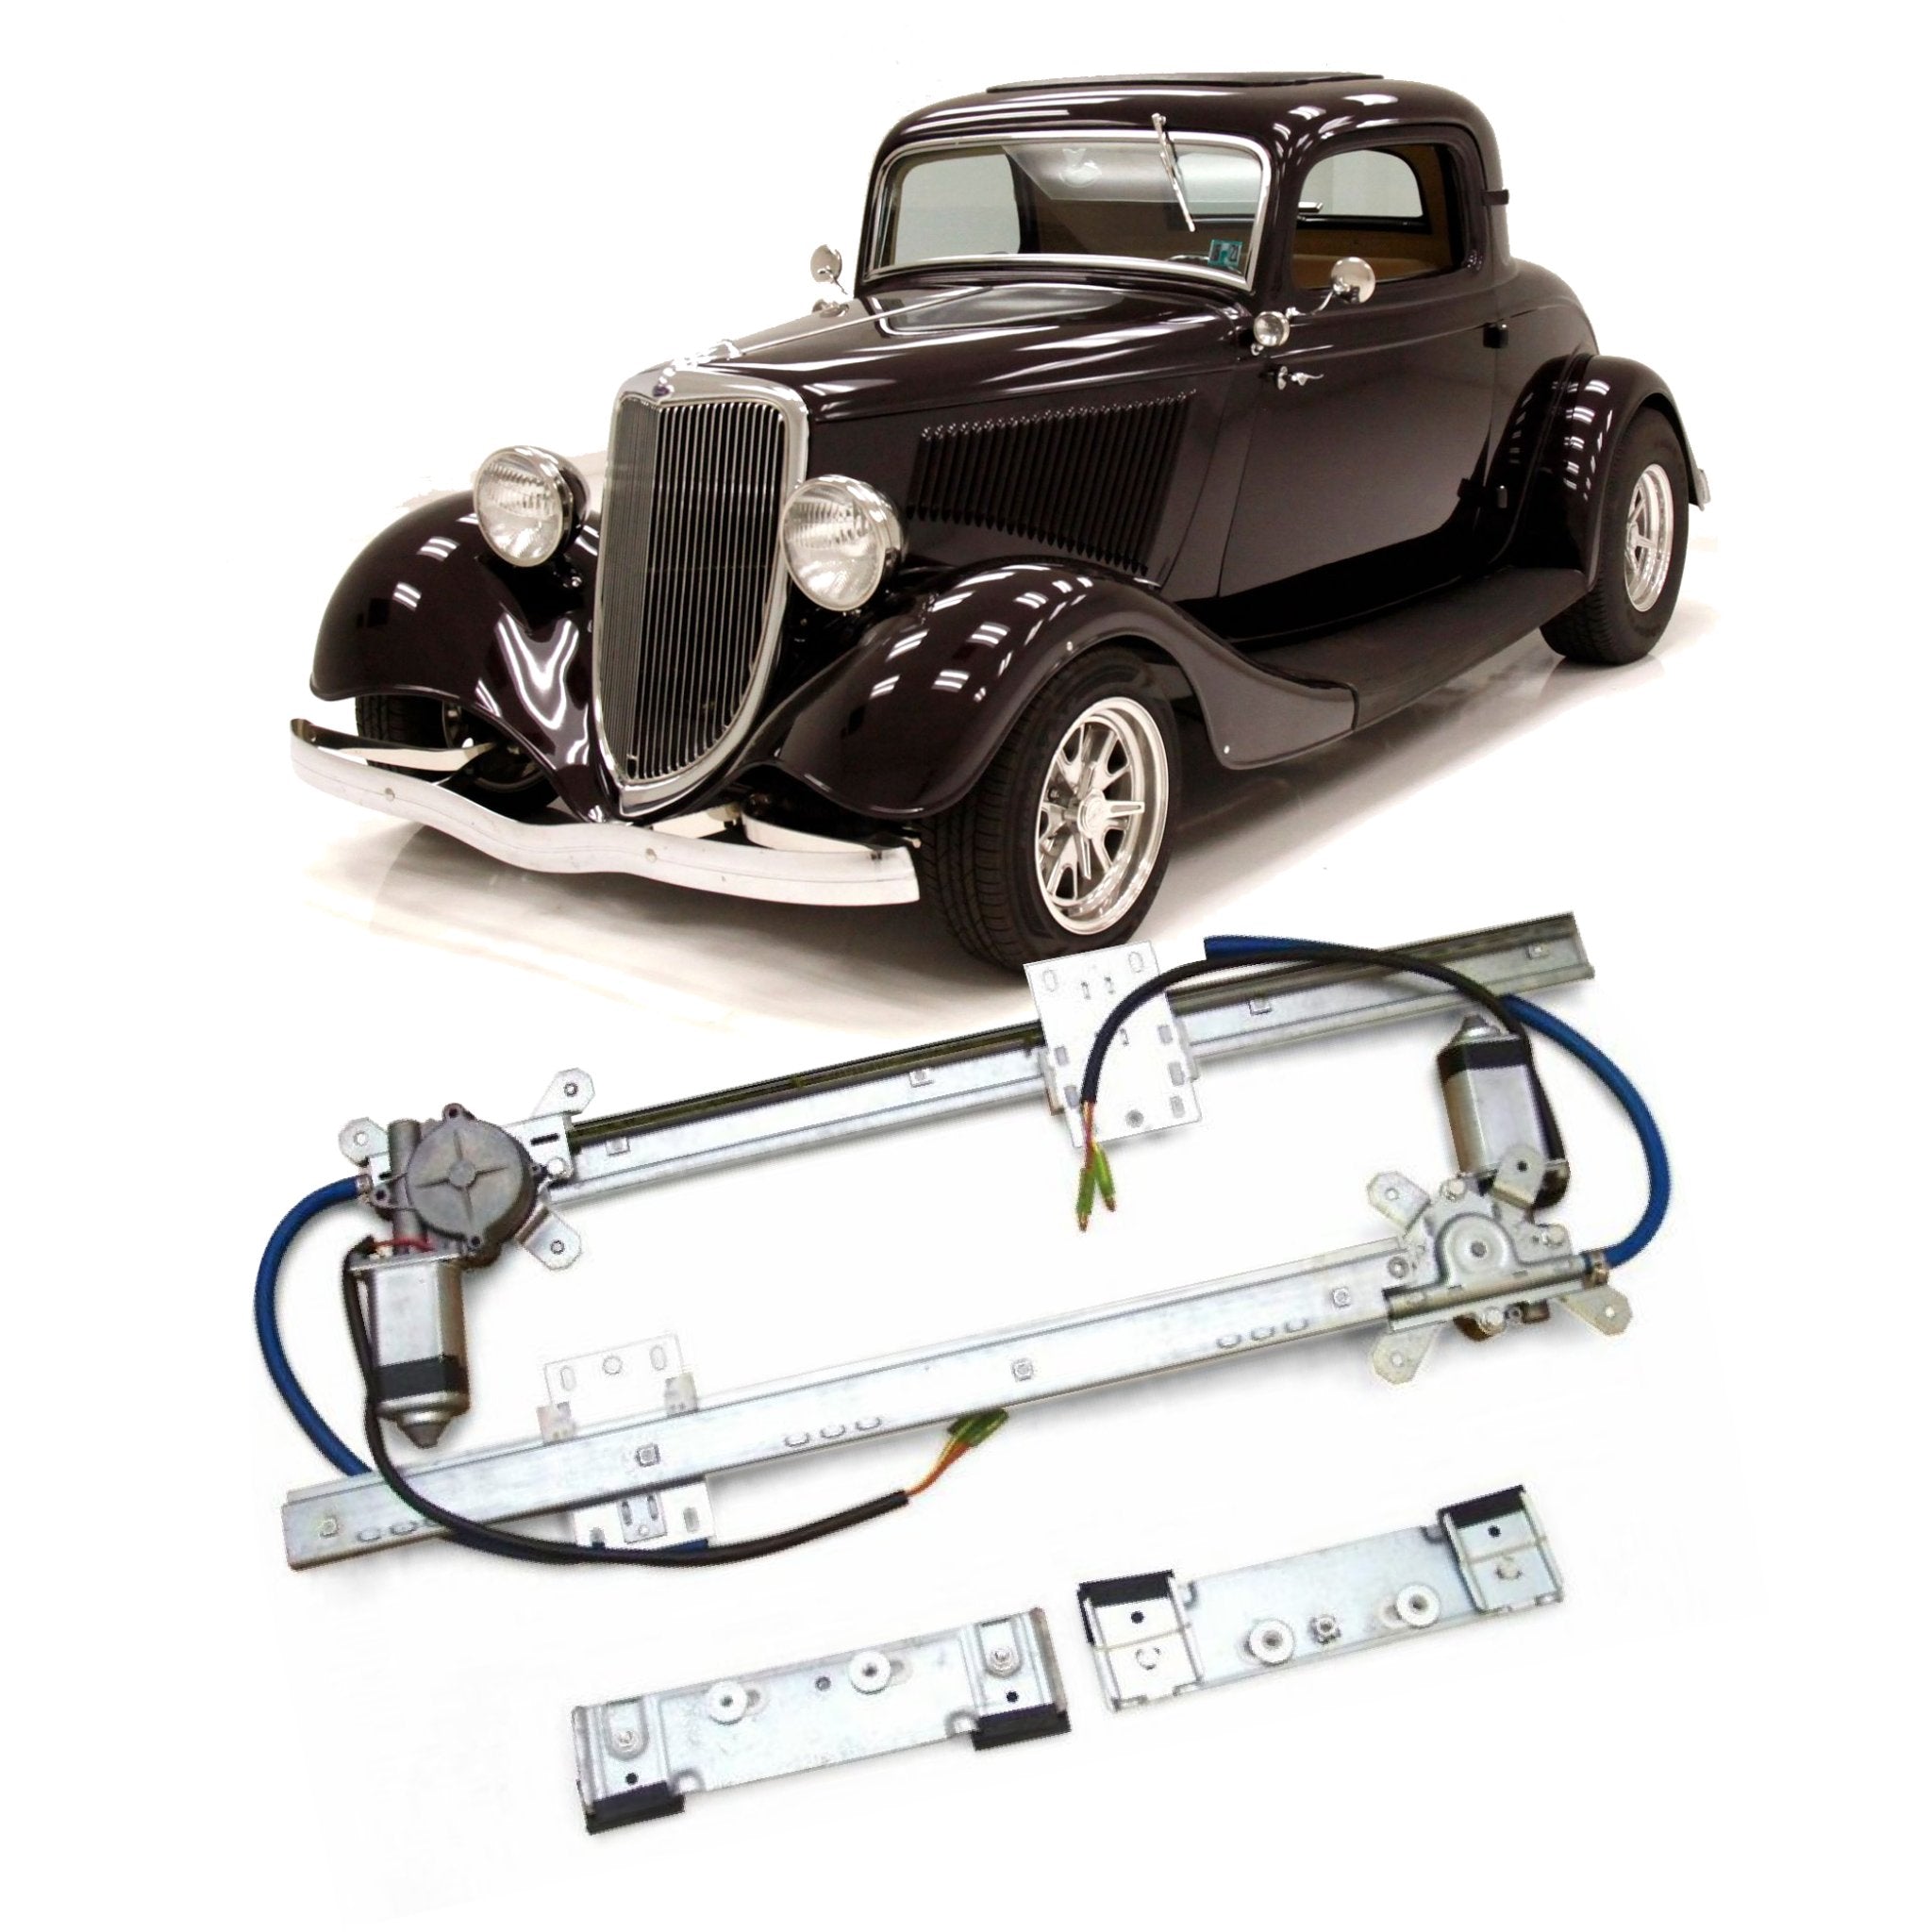 2 Door 12V Power Window Conversion Kit for 1934 Model 40 Coupe, 3, 5 Window